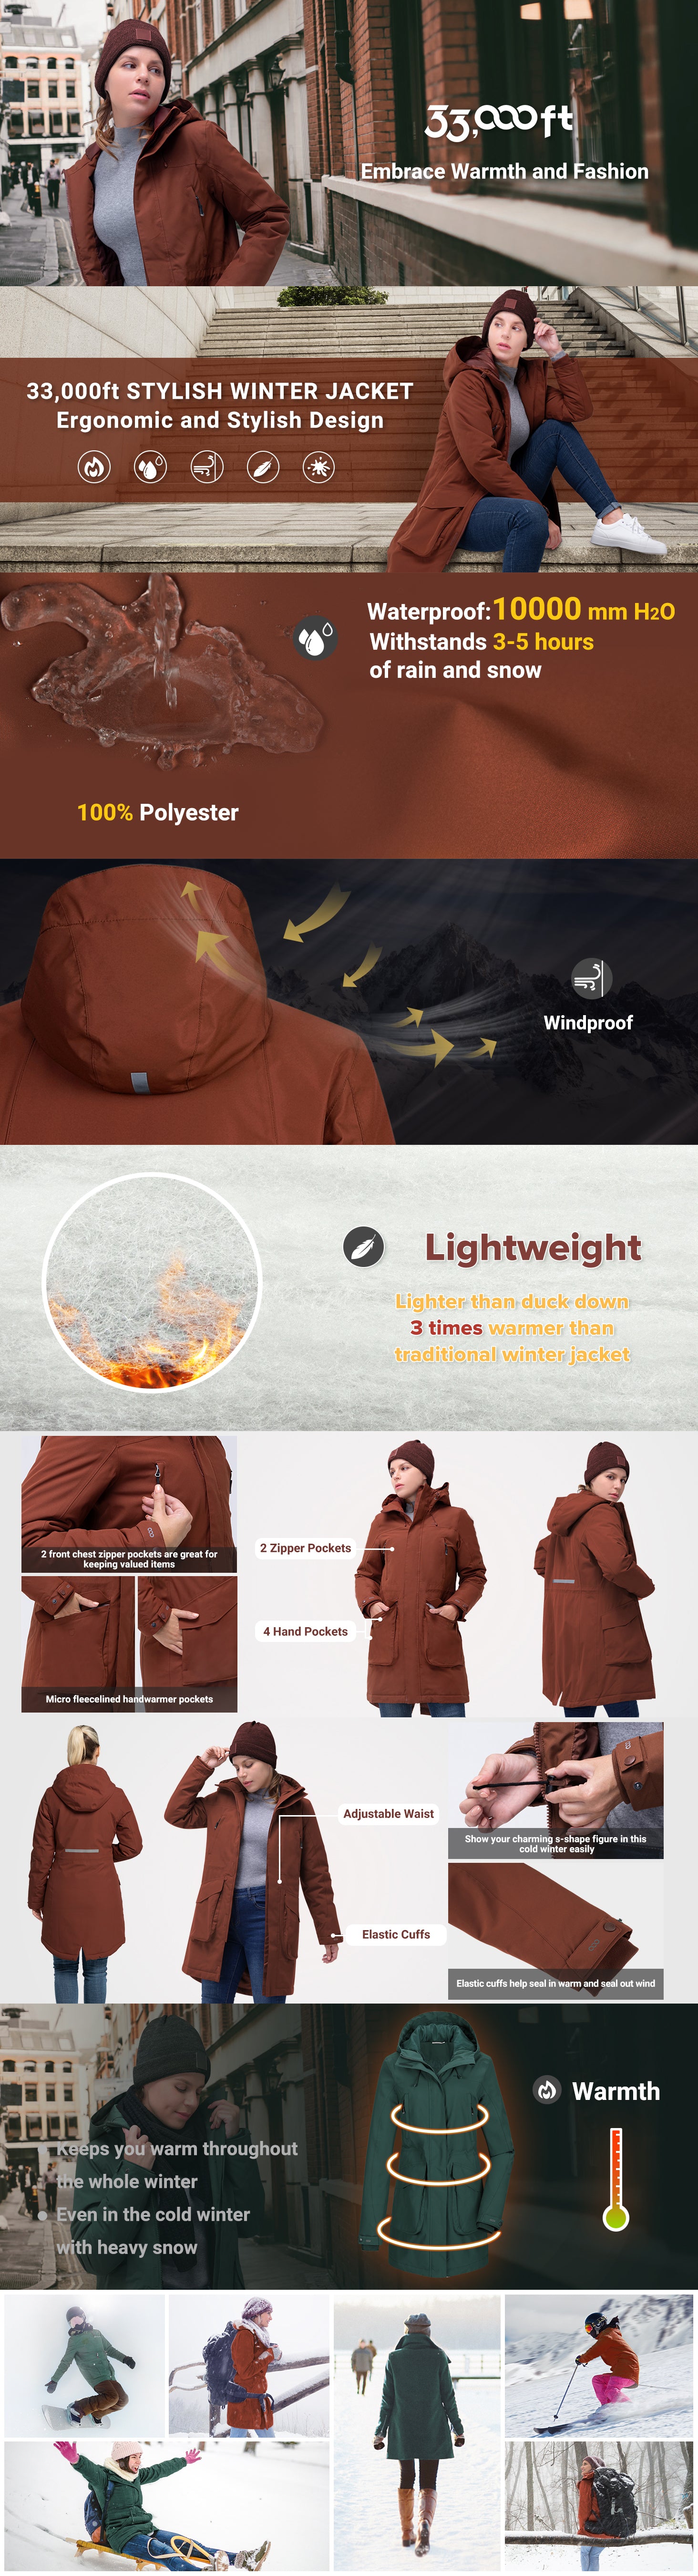 Women's Parka Coat With Hood, Long Insulated Military Jacket Thermal Thickened Windproof Winter Coat